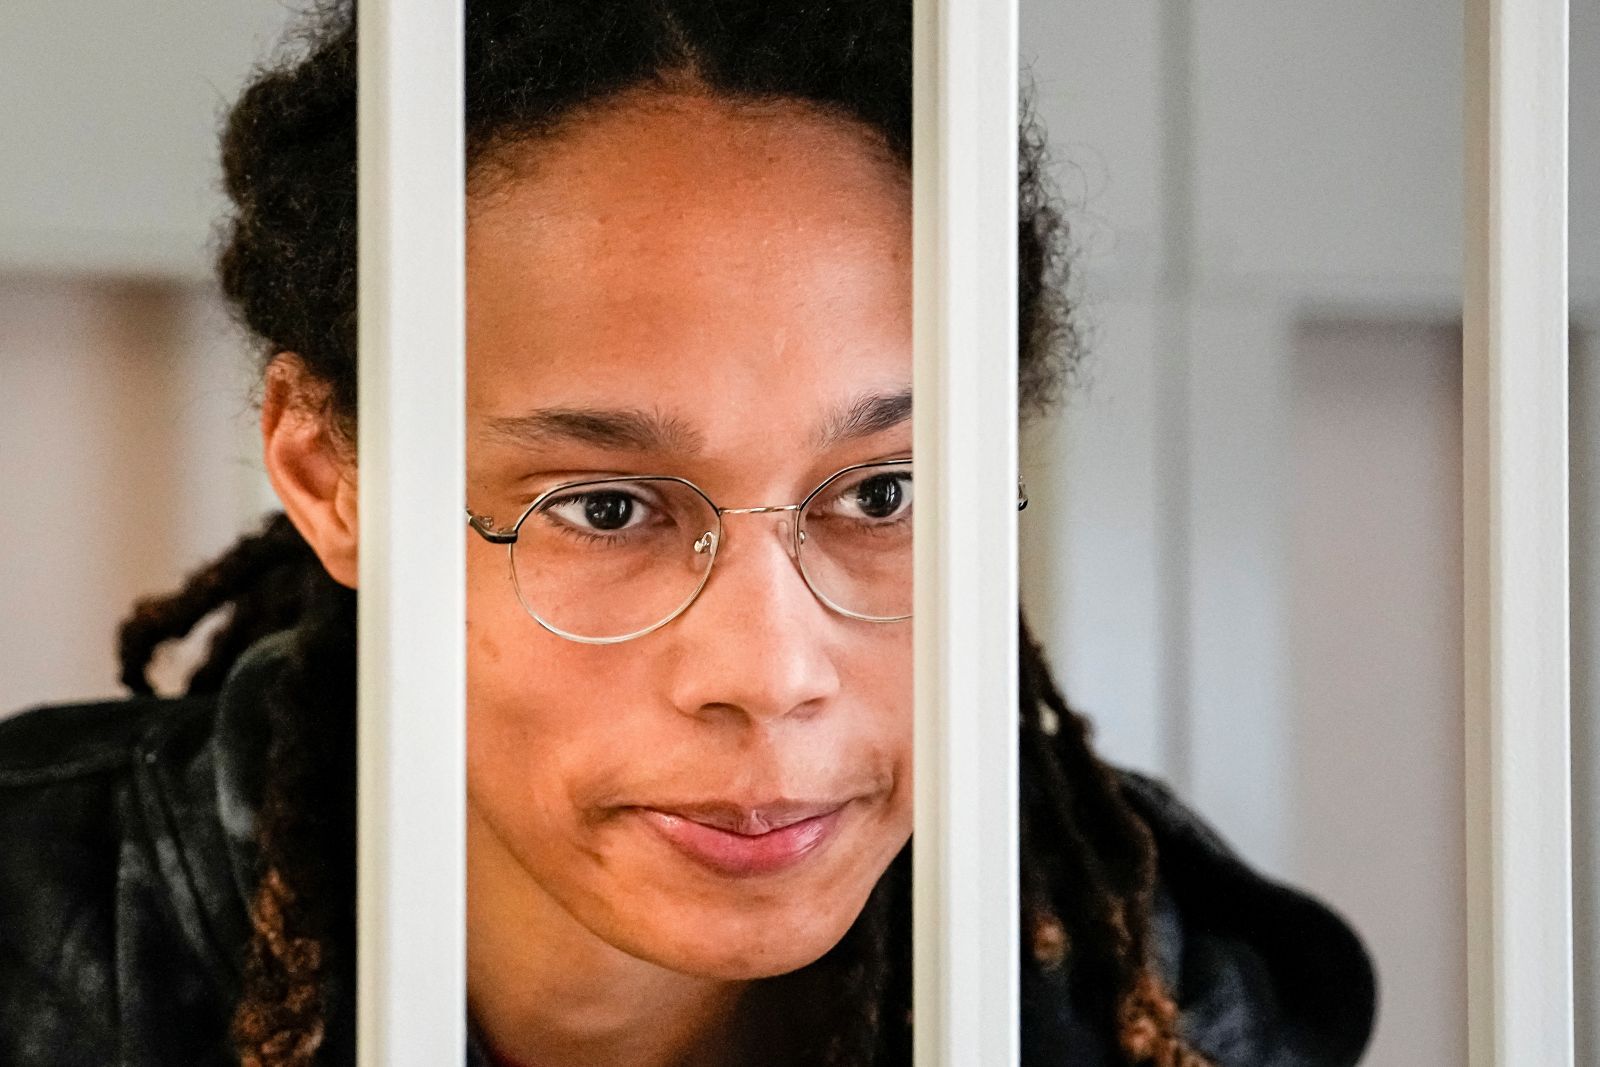 WNBA star and two-time Olympic gold medalist Brittney Griner speaks to her lawyers standing in a cage at a court room prior to a hearing, in Khimki just outside Moscow, Russia, July 26, 2022. Alexander Zemlianichenko/Pool via REUTERS